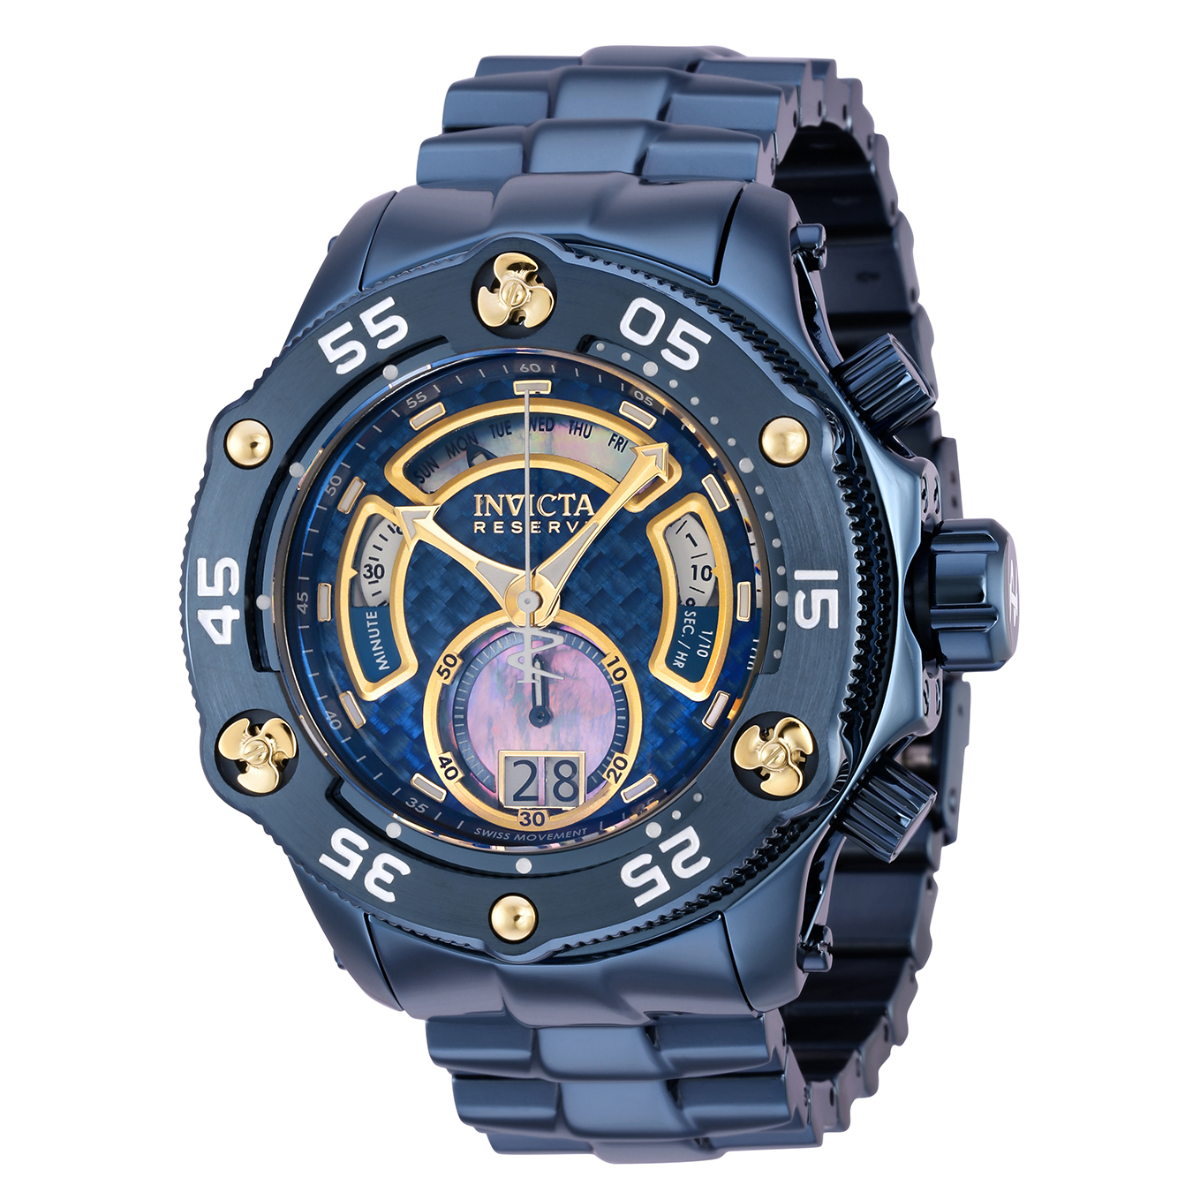 Invicta Reserve Excursion Men's Watch w/Mother of Pearl, Oyster Dial - 52.00mm, Dark Blue (36012)